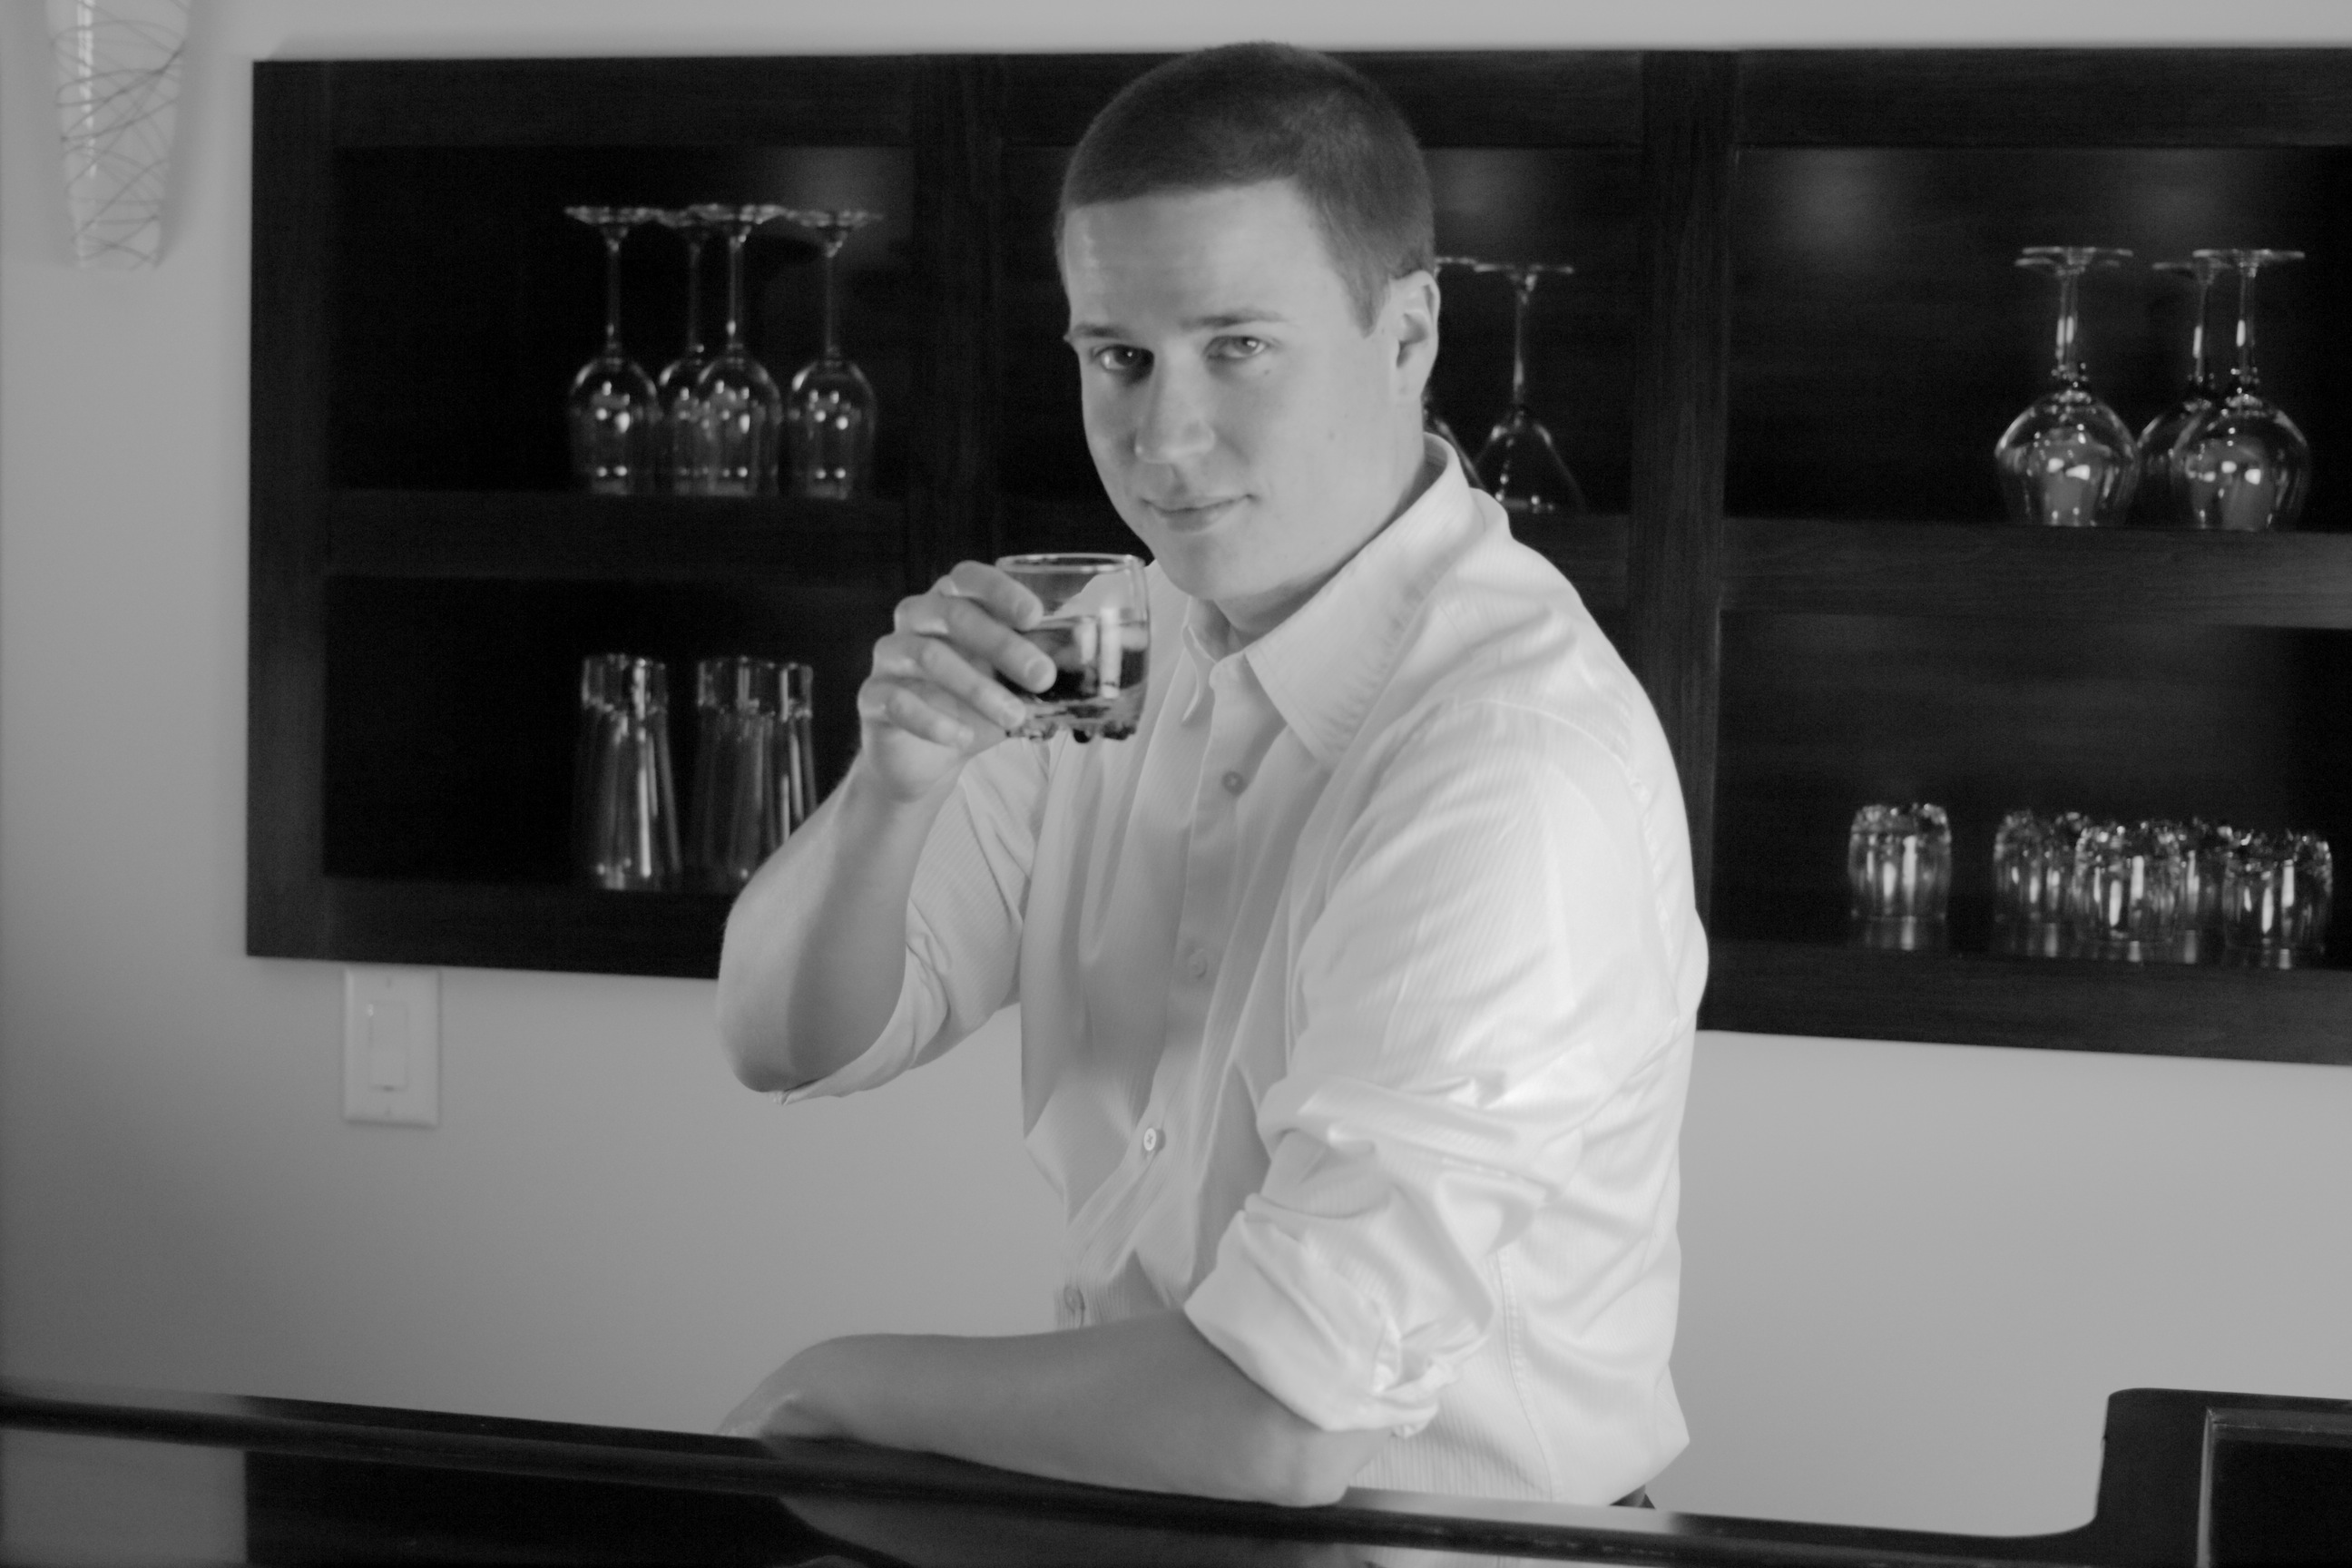 The author stands behind a bar wearing a formal white shirt
           with the collar unbuttoned and the sleeves rolled up. As his
           eyes meet the camera, he smirks and hoists a tumbler half full
           of dark liquid.